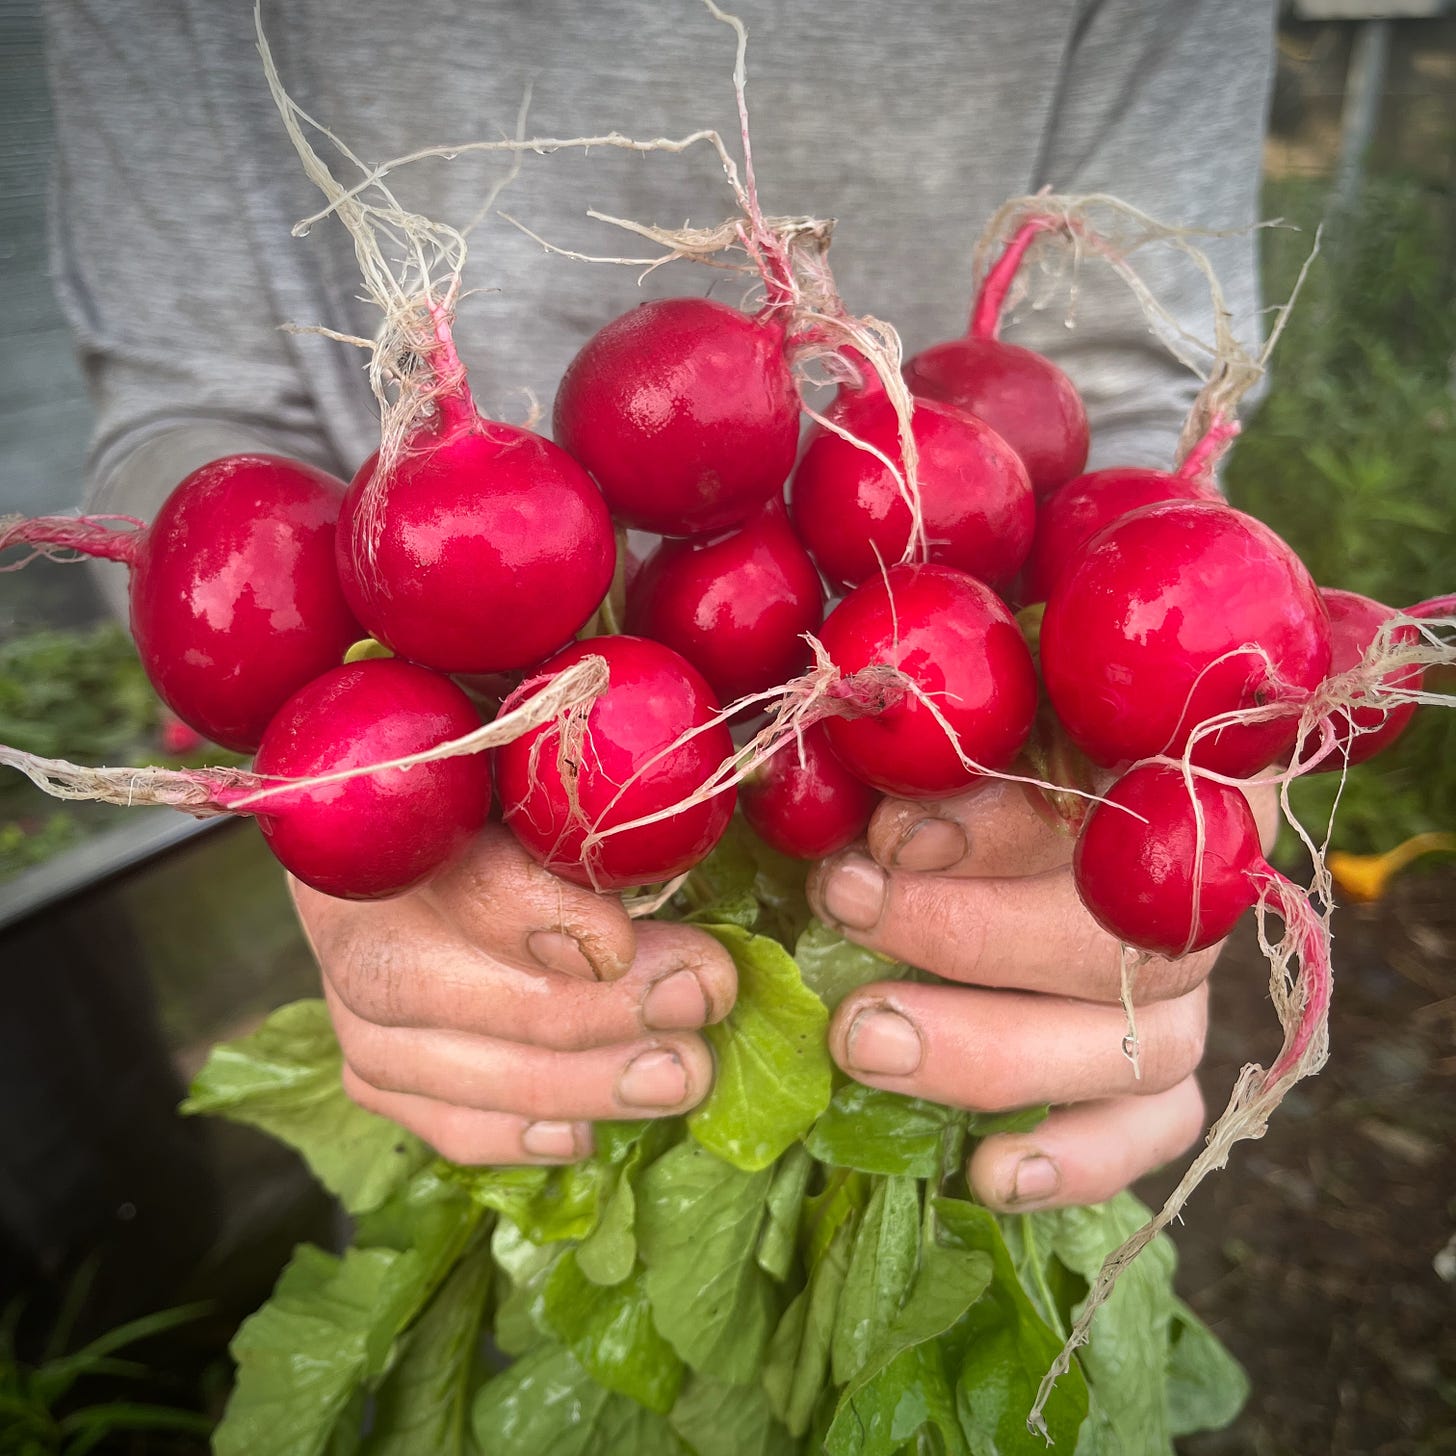 Hands holding up bunches of red radishes